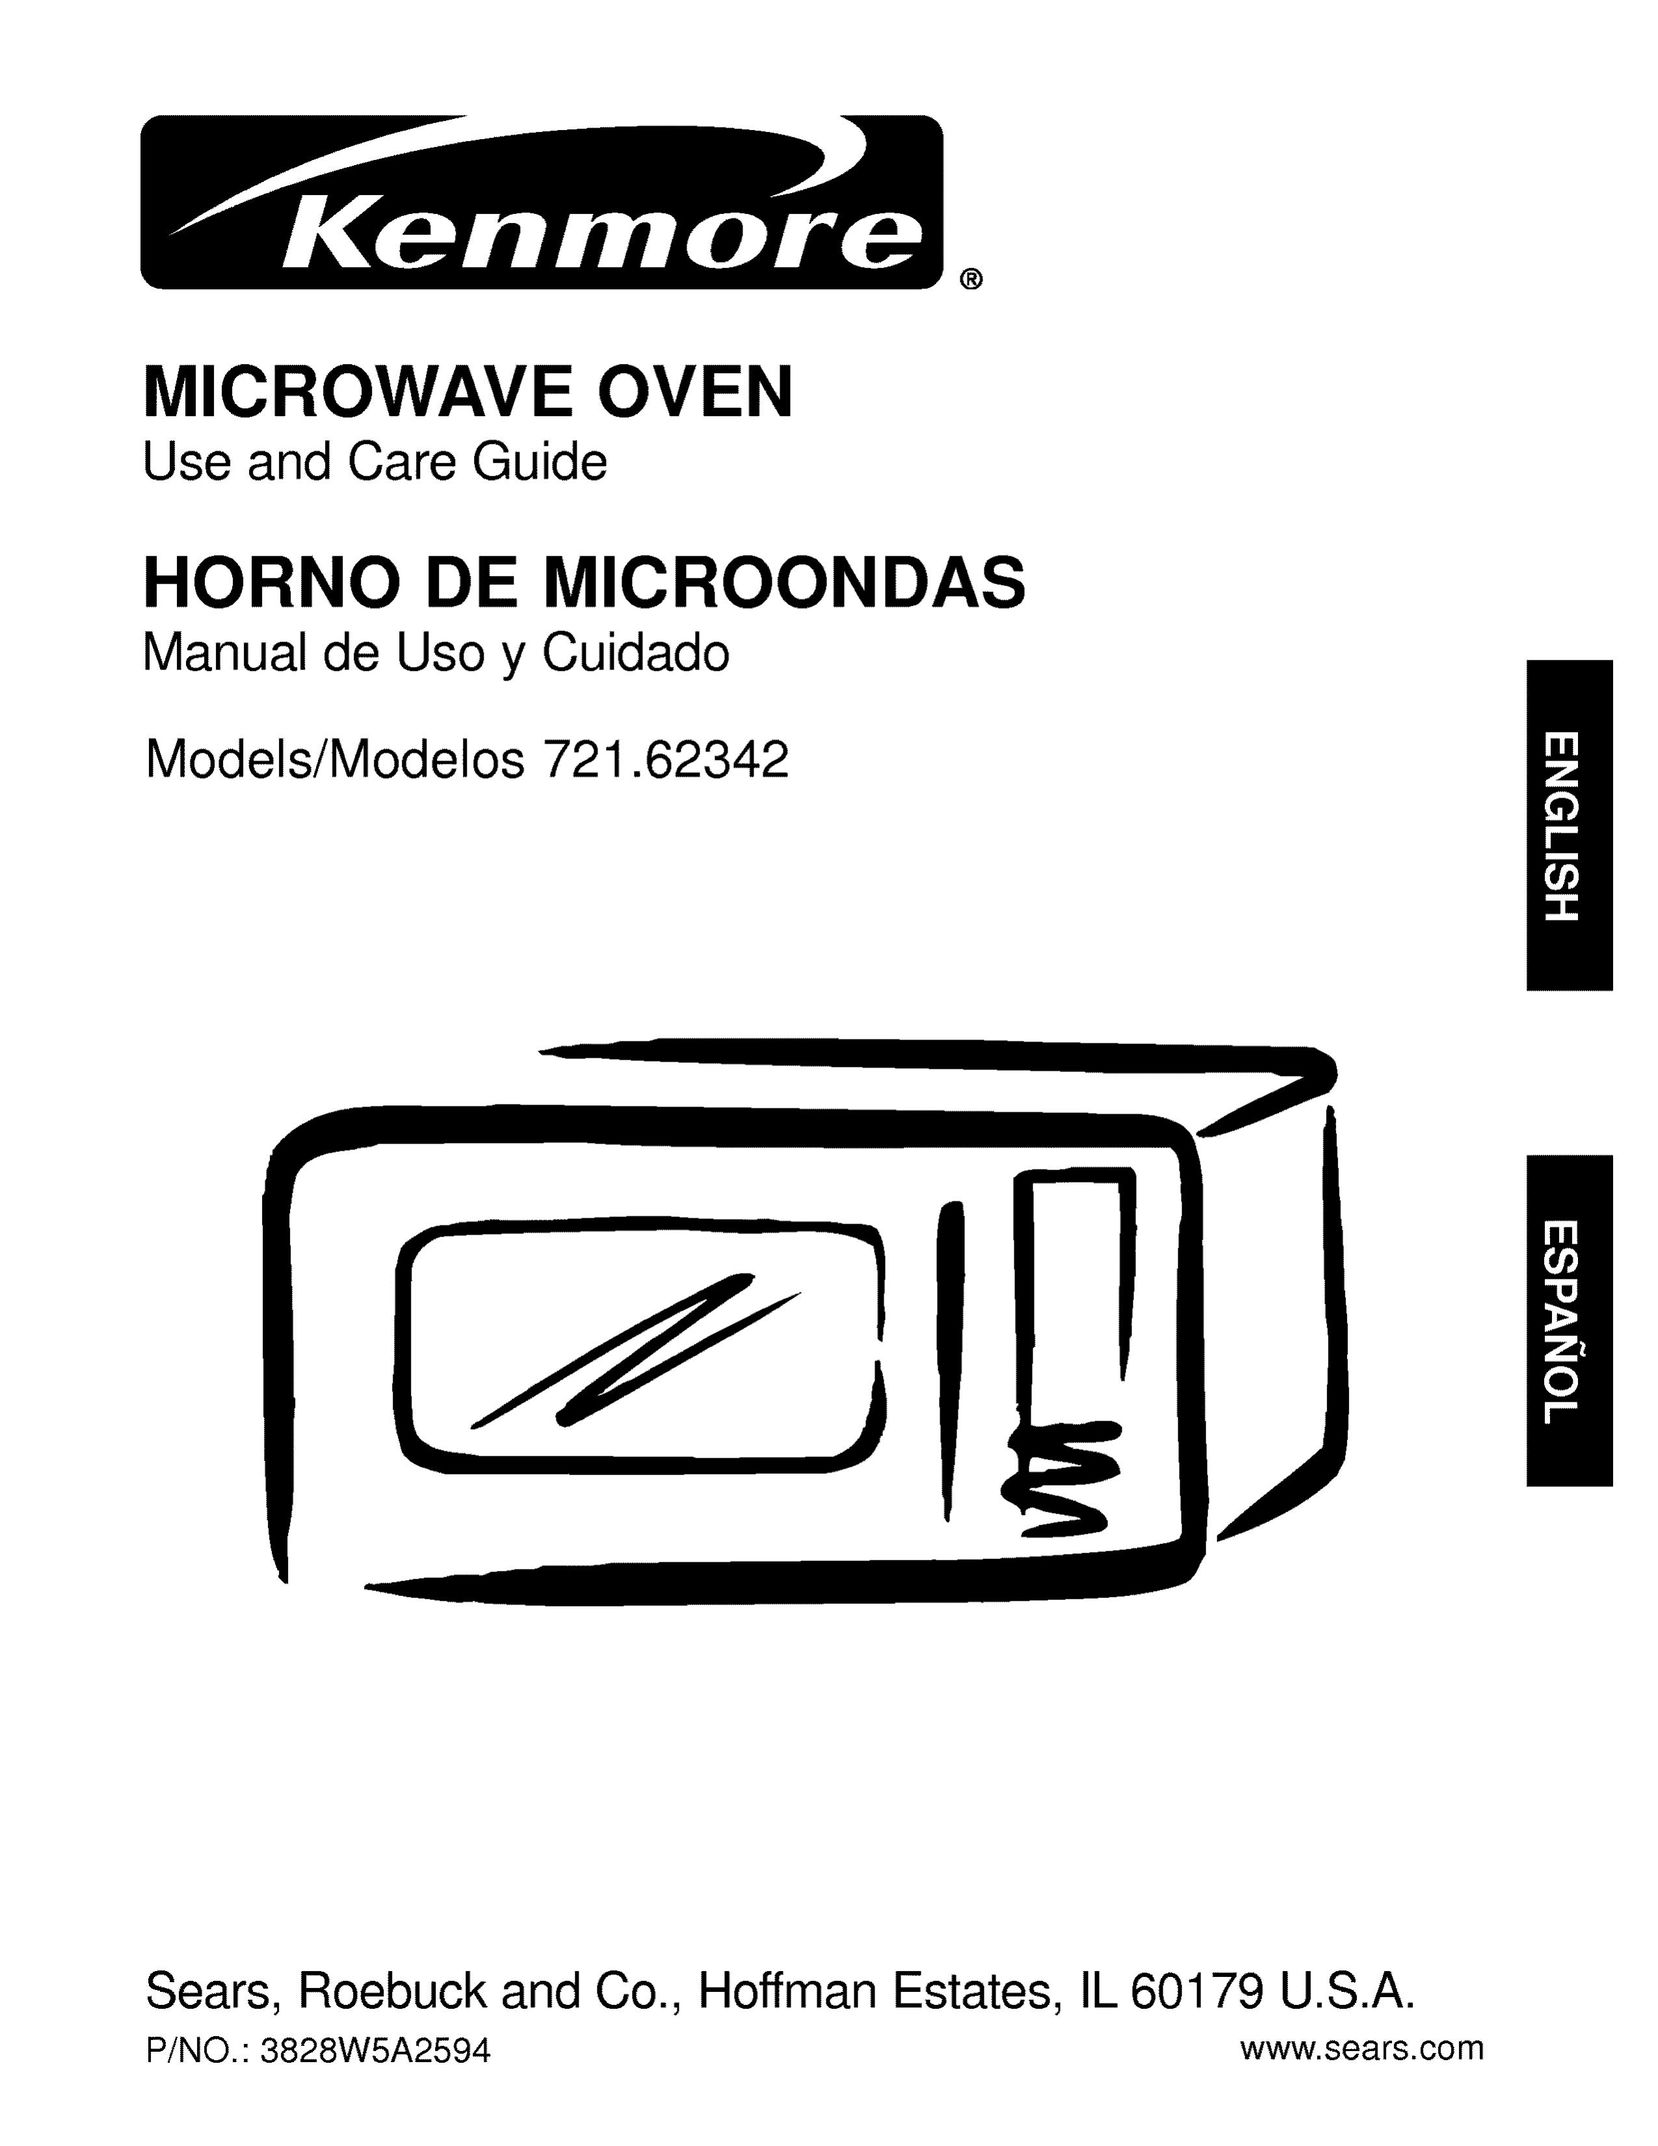 Kenmore 721.62342 Microwave Oven User Manual